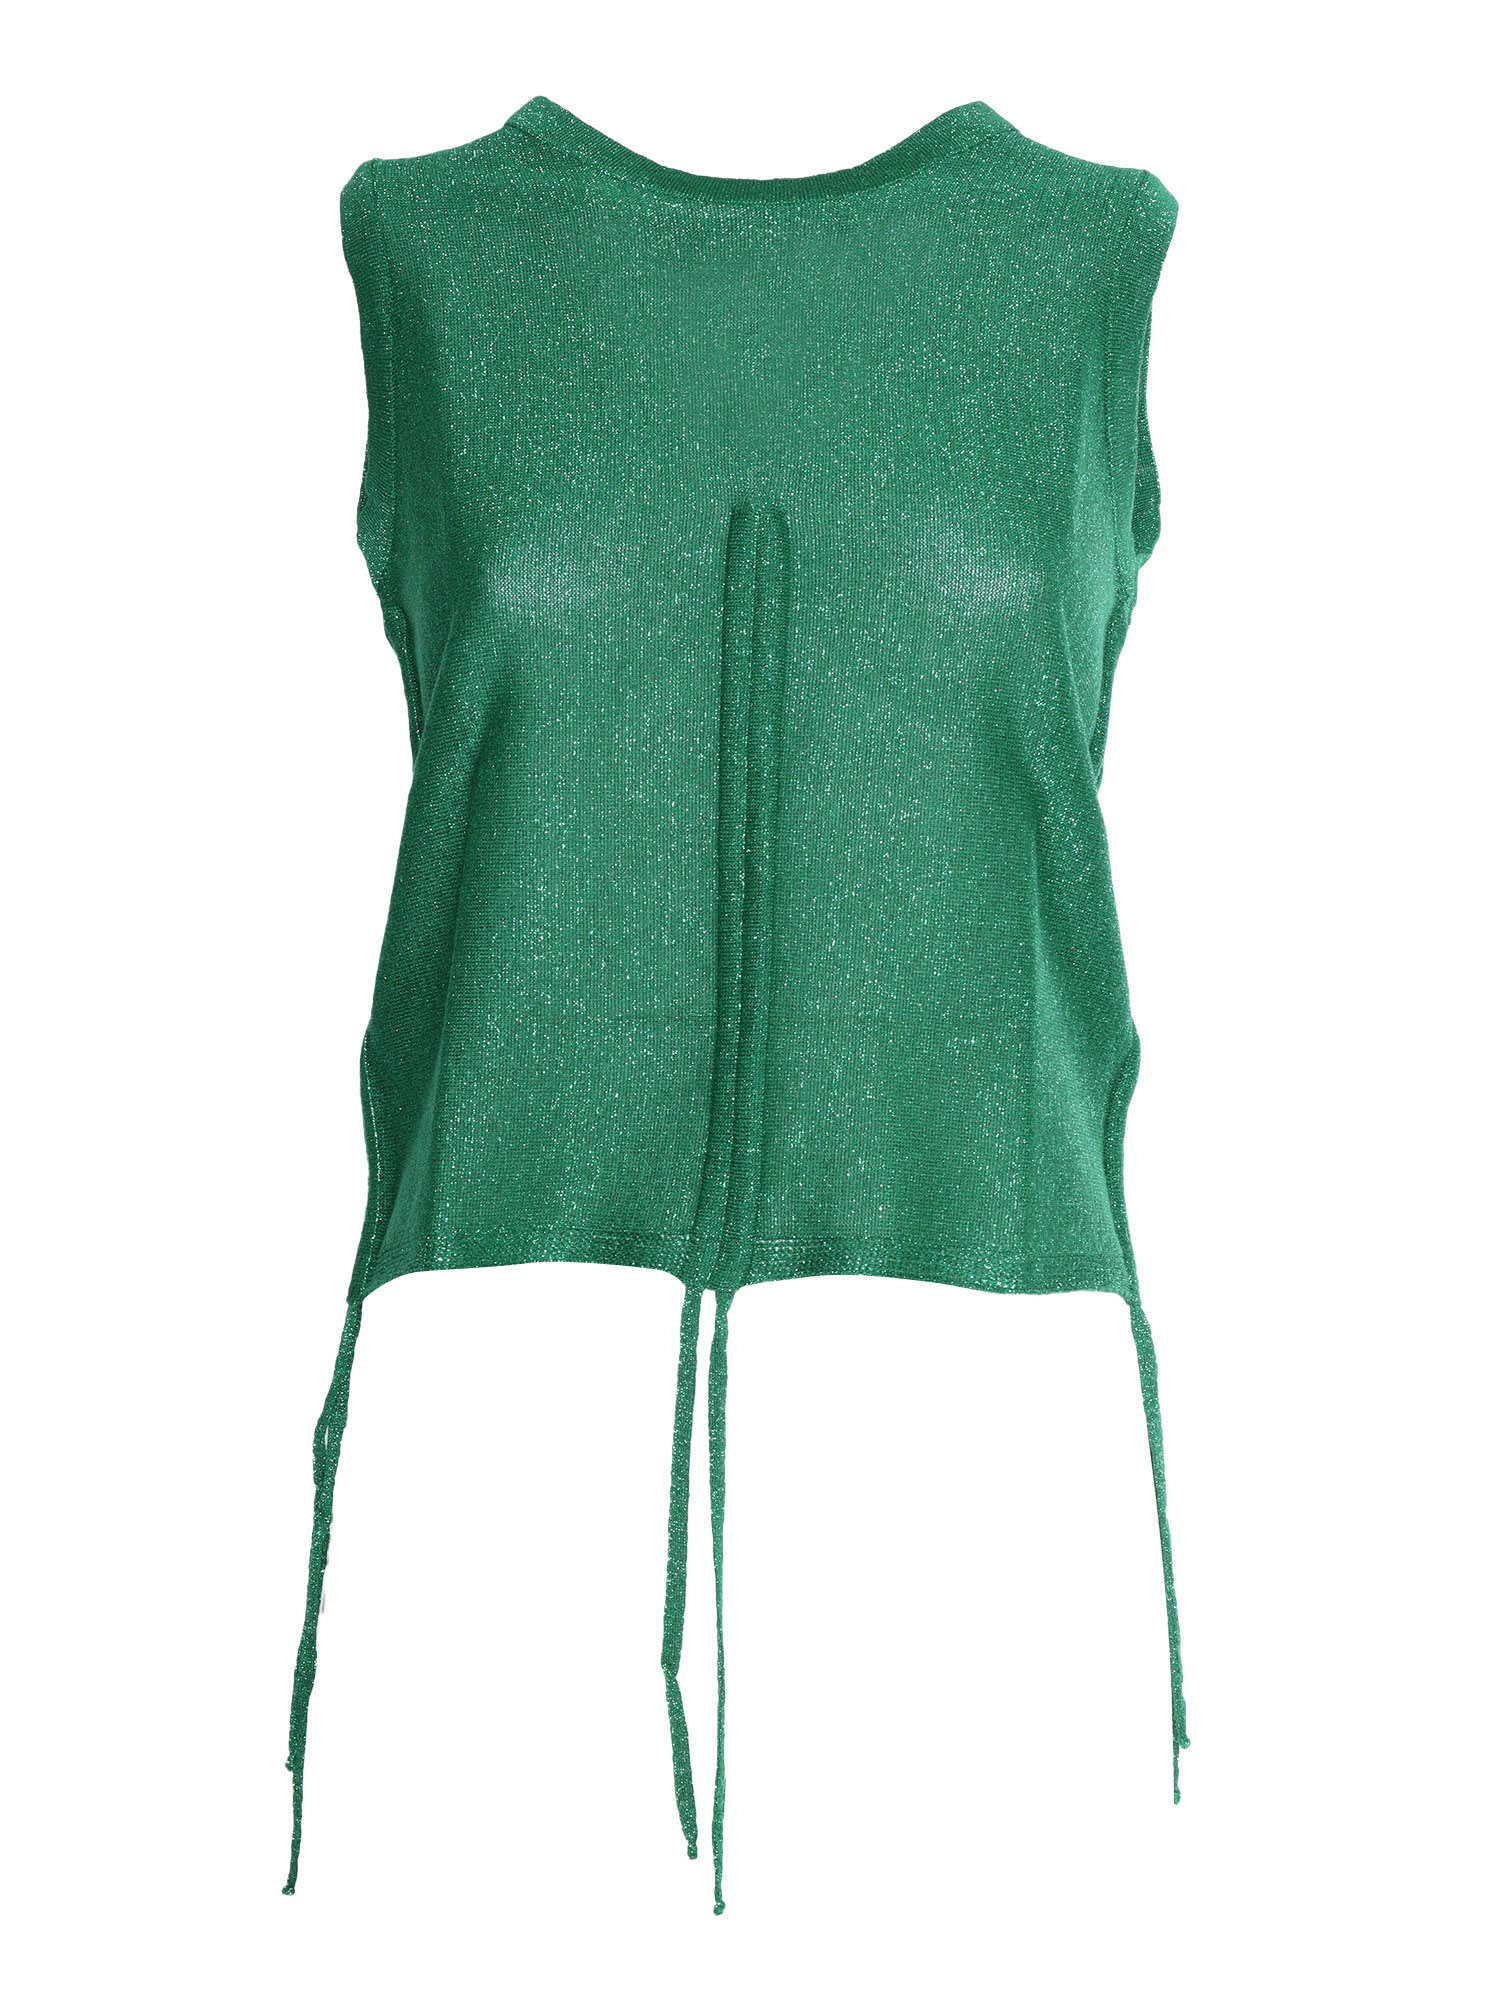 Ermanno Ermanno Scervino Green Knitted Top